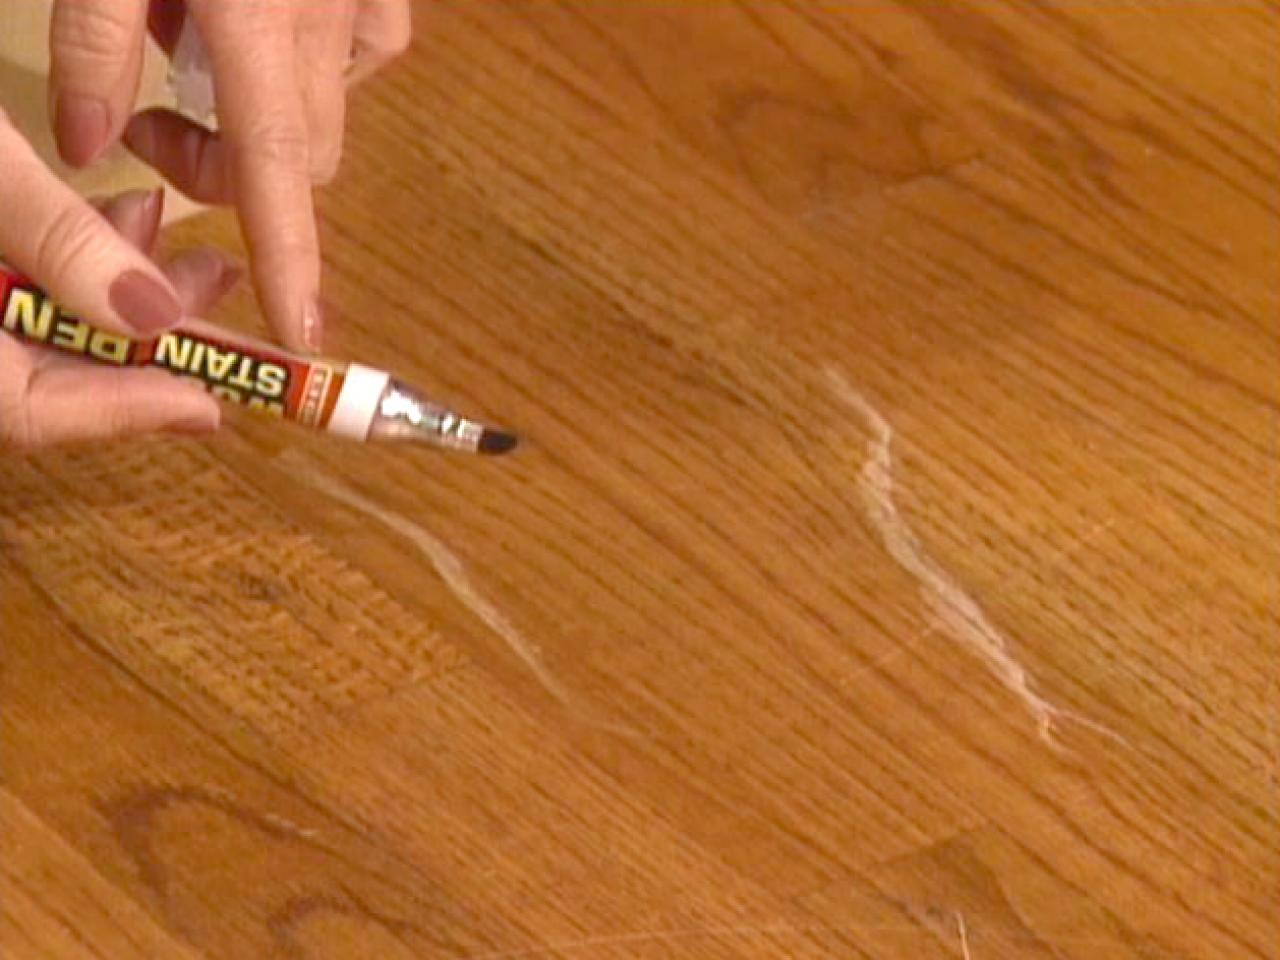 How To Touch Up Wood Floors Tos Diy, How To Remove Scratches From Laminate Hardwood Floors